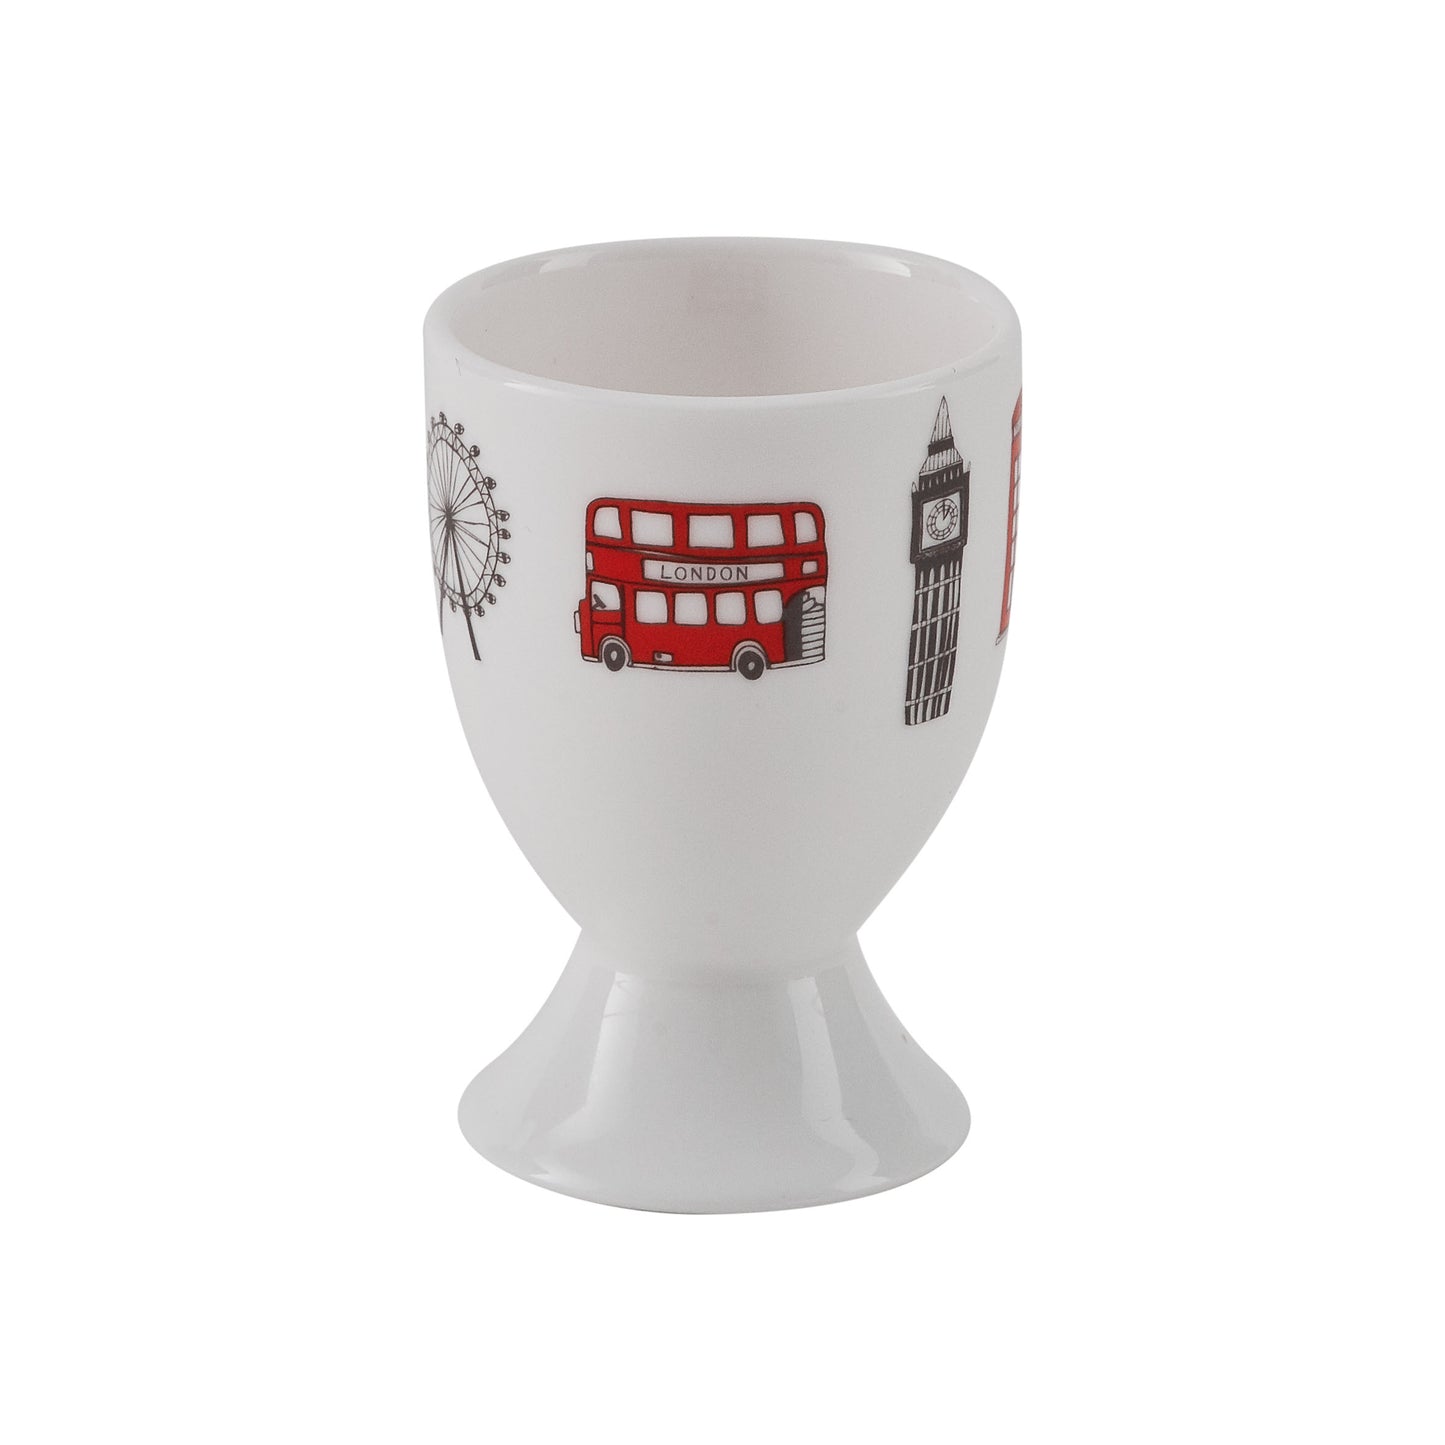 Fine bone china egg cup, London skyline egg cup, London inspired egg cup, Egg cup with repeating London design, Iconic London landscape egg cup, Simple London egg cup, Fine bone china London egg cup, British made egg cup, London homeware and gifts, London